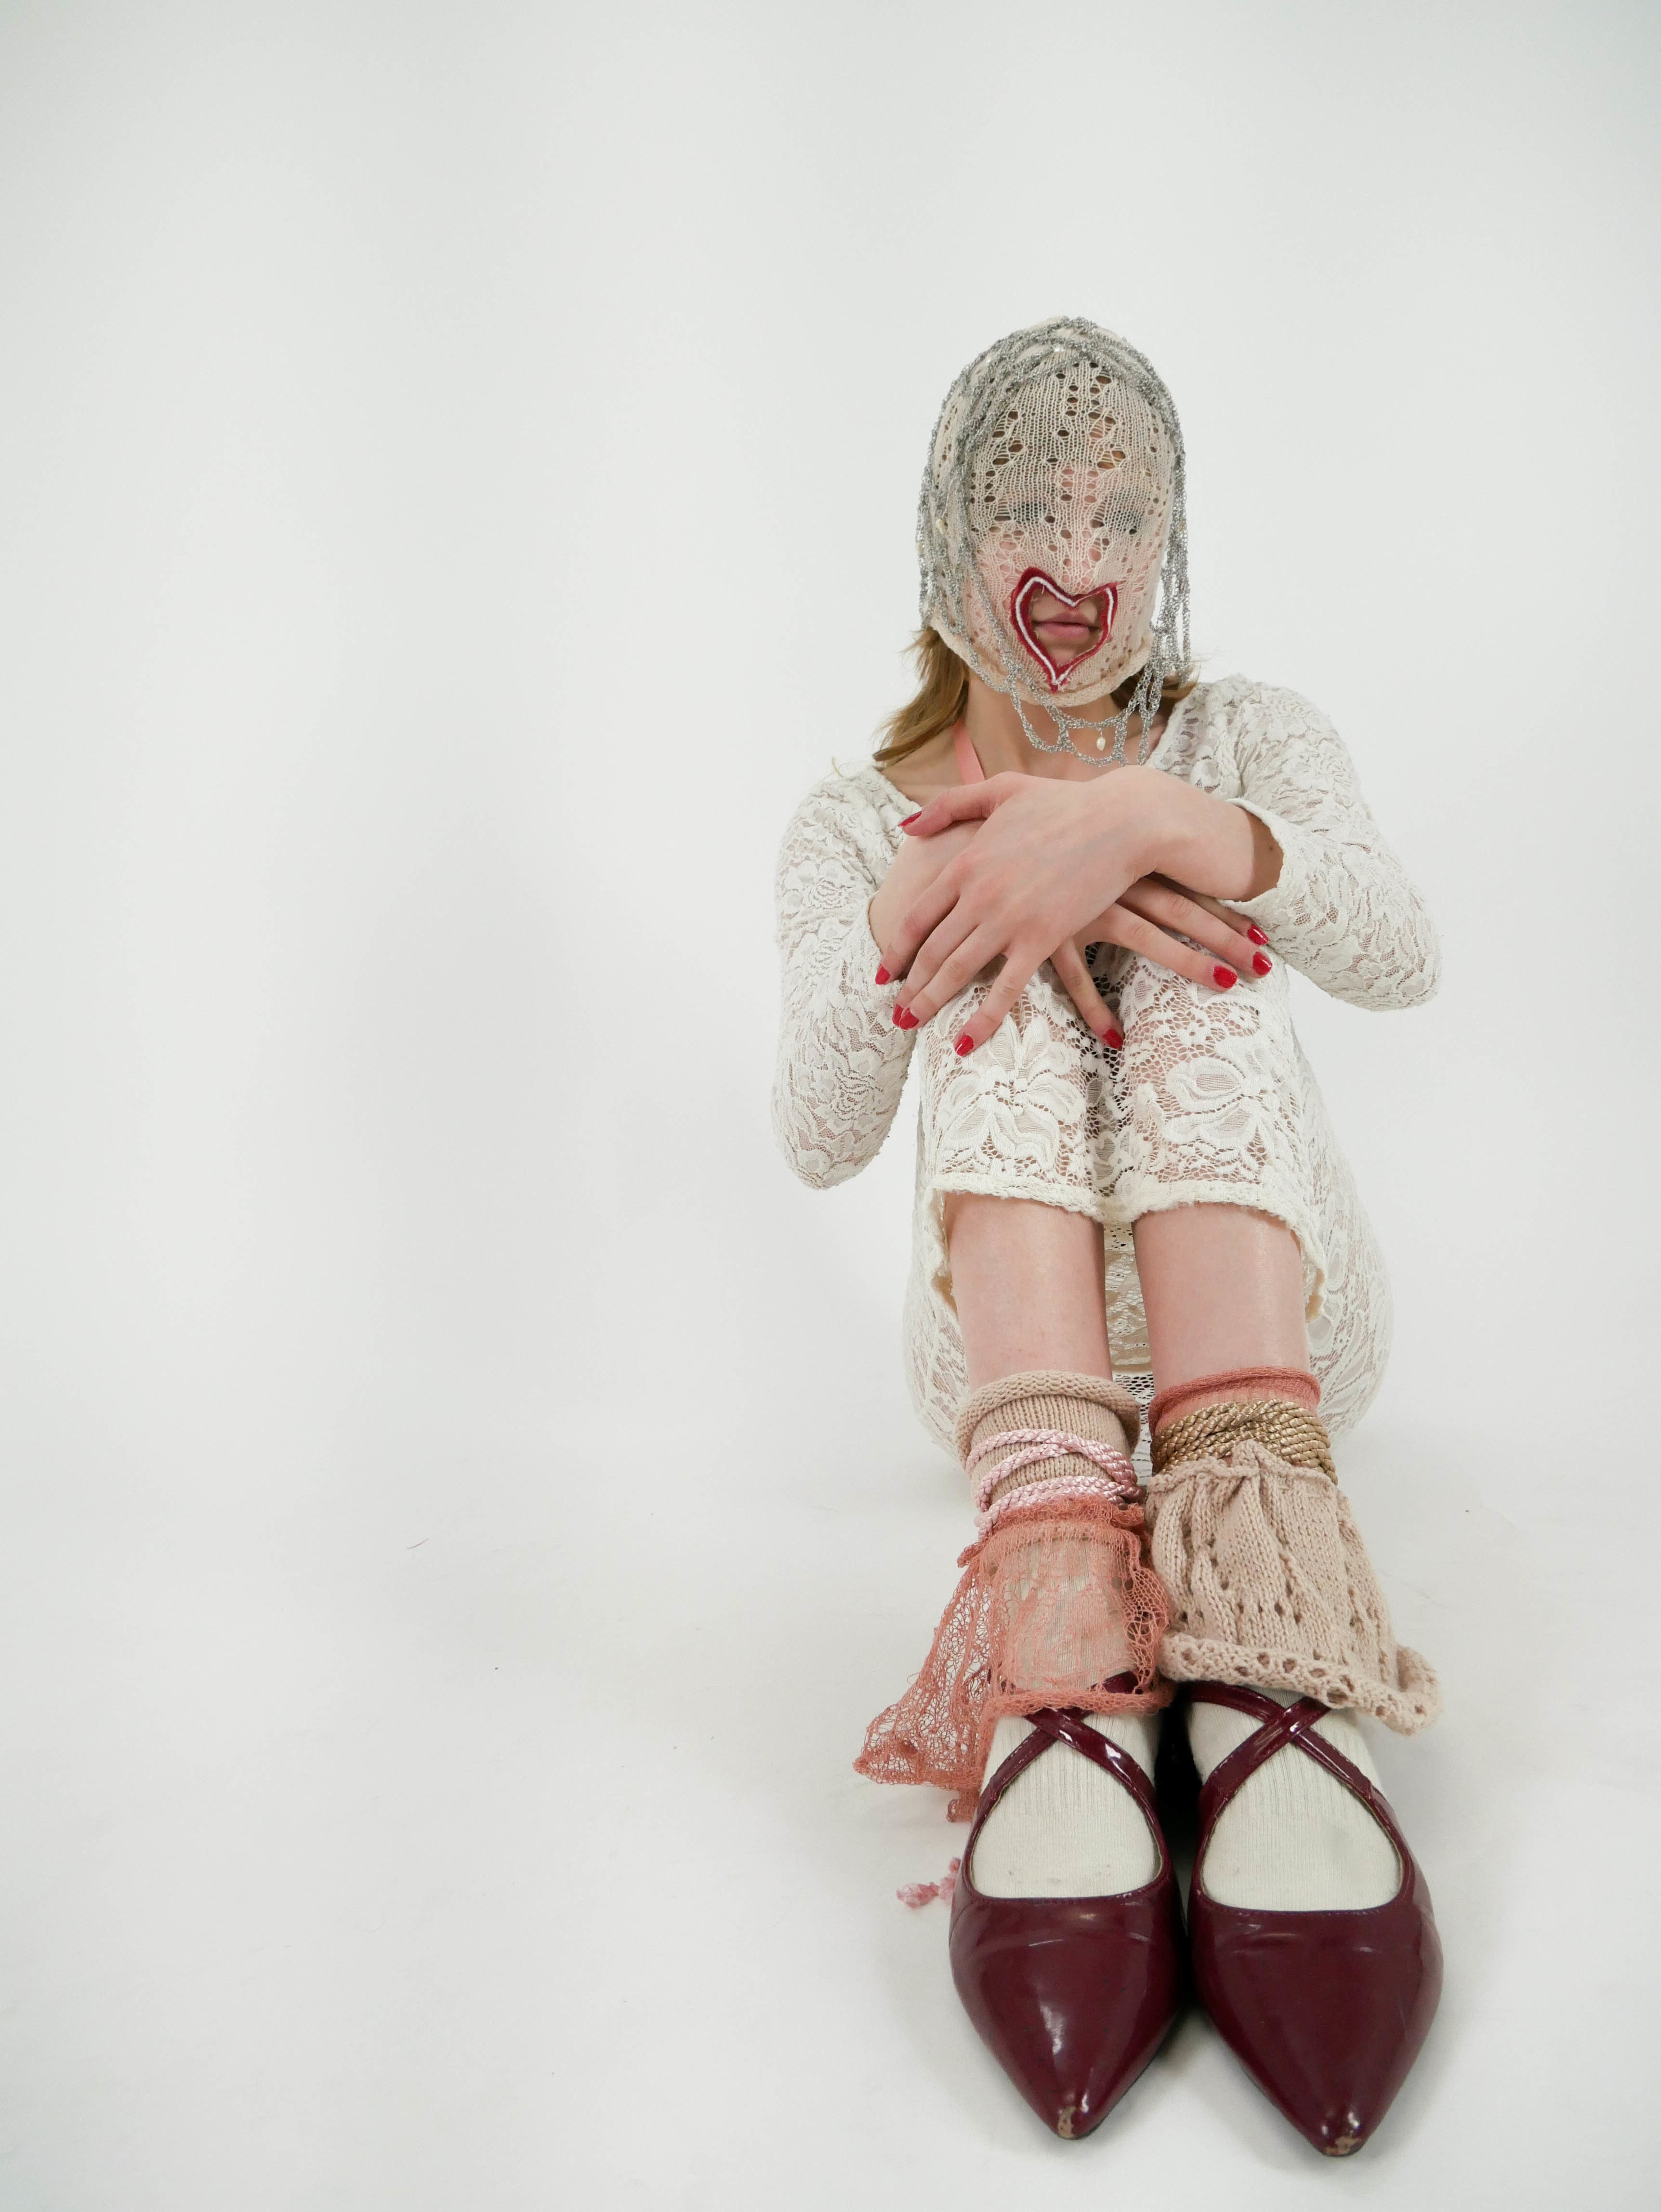 Model sat with knees to chest wearing knitted mask and legwarmers